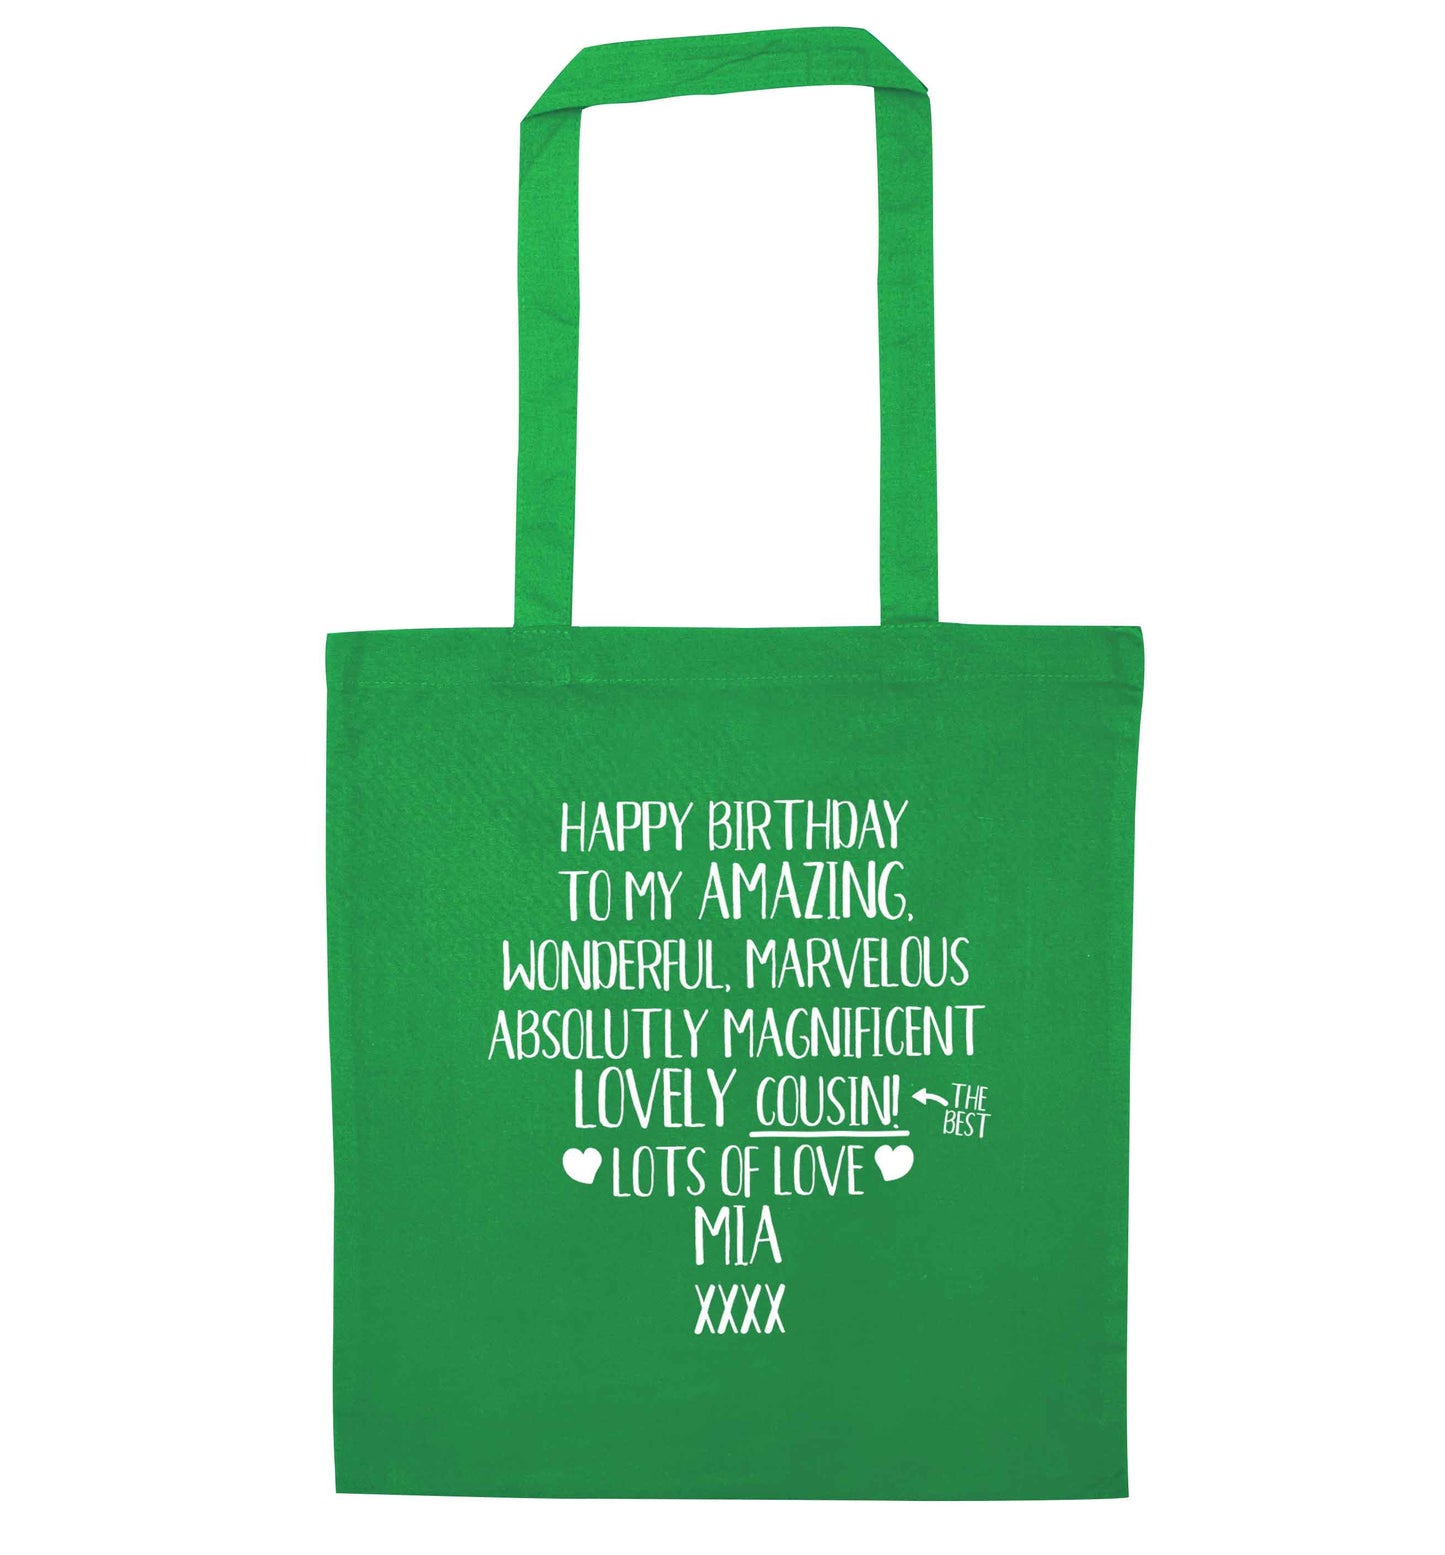 Personalised happy birthday to my amazing, wonderful, lovely cousin green tote bag